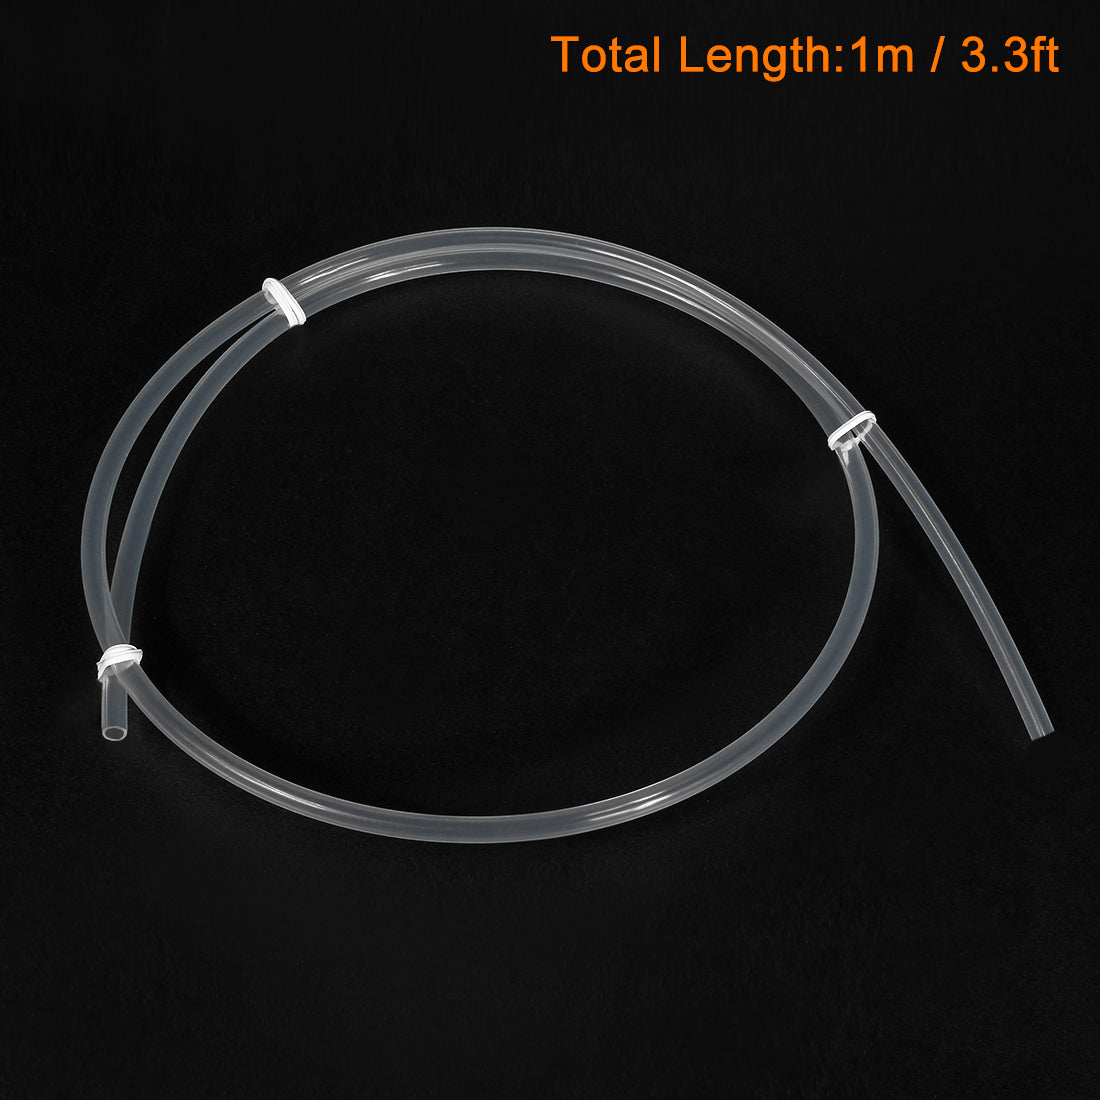 uxcell Uxcell PTFE Tube Tubing 1 Meter 3.3ft Lengh for 3.0 Filament Pipe 4mm ID 6mm OD for 3D Printer RepRap